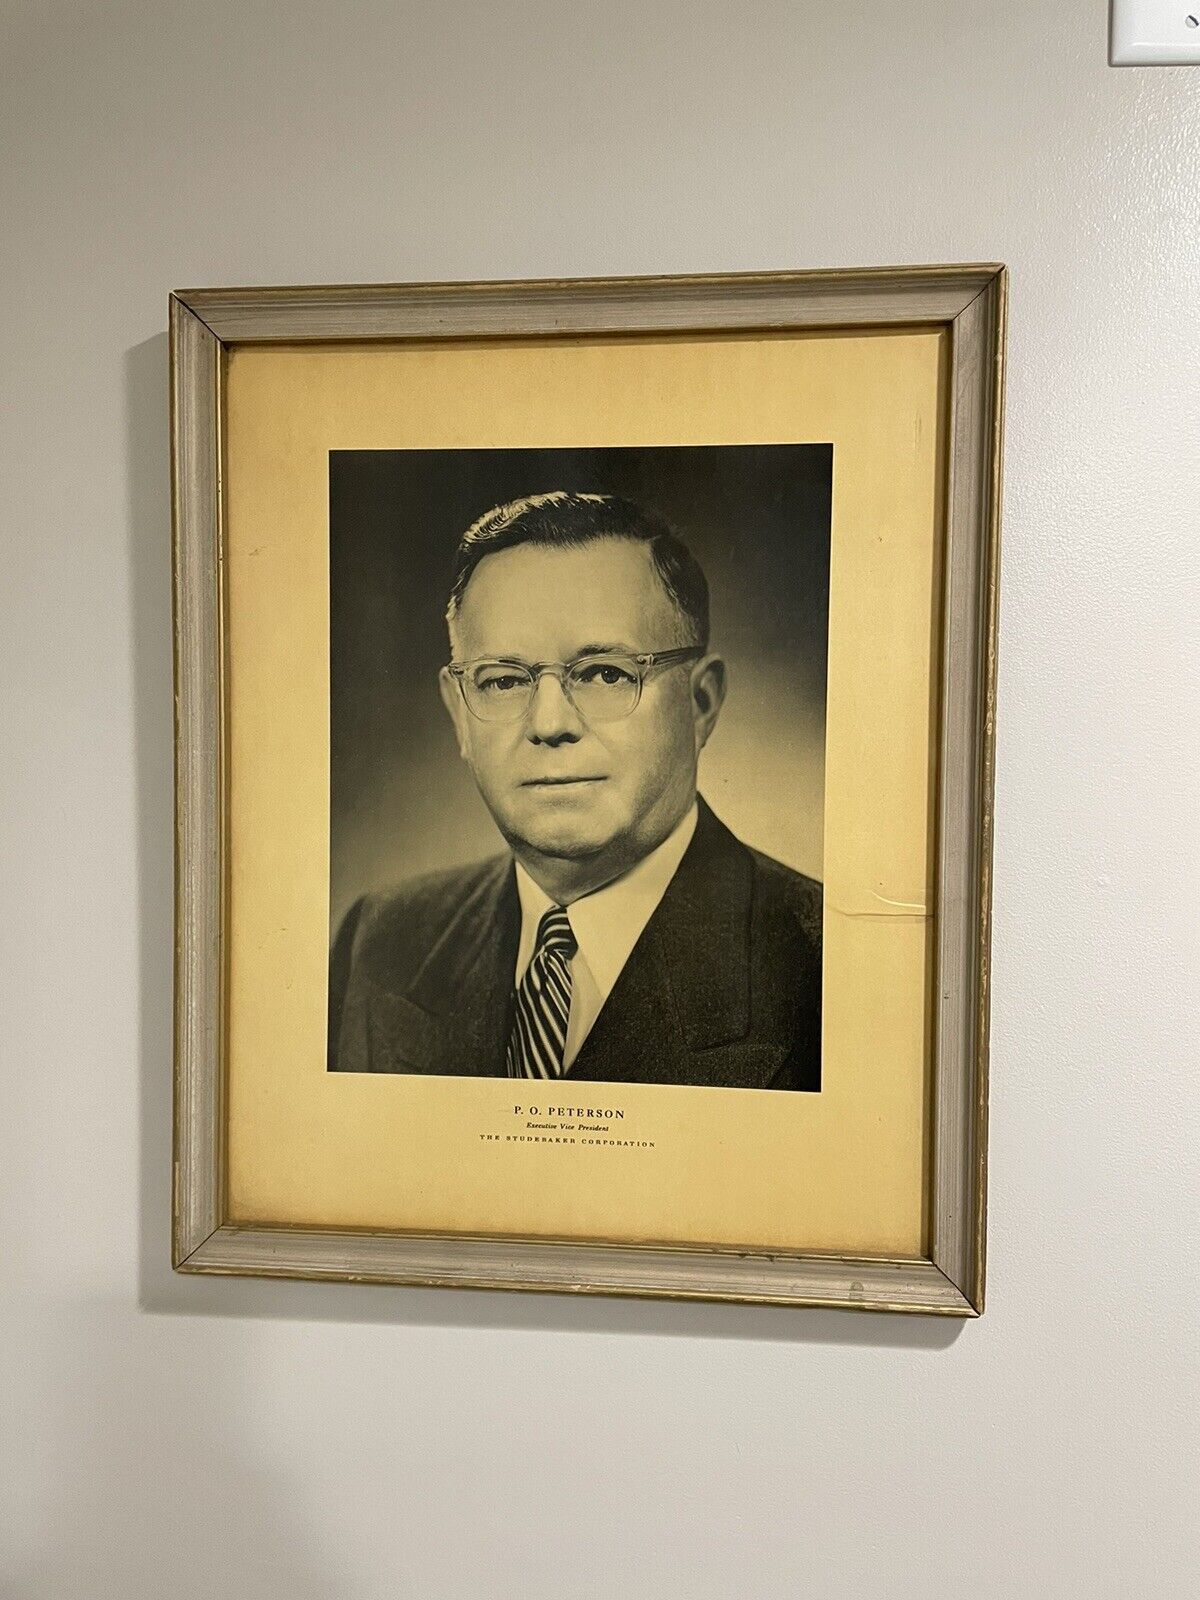 Studebaker framed pictures of Three Board Members. Pictures From Studebaker Corp